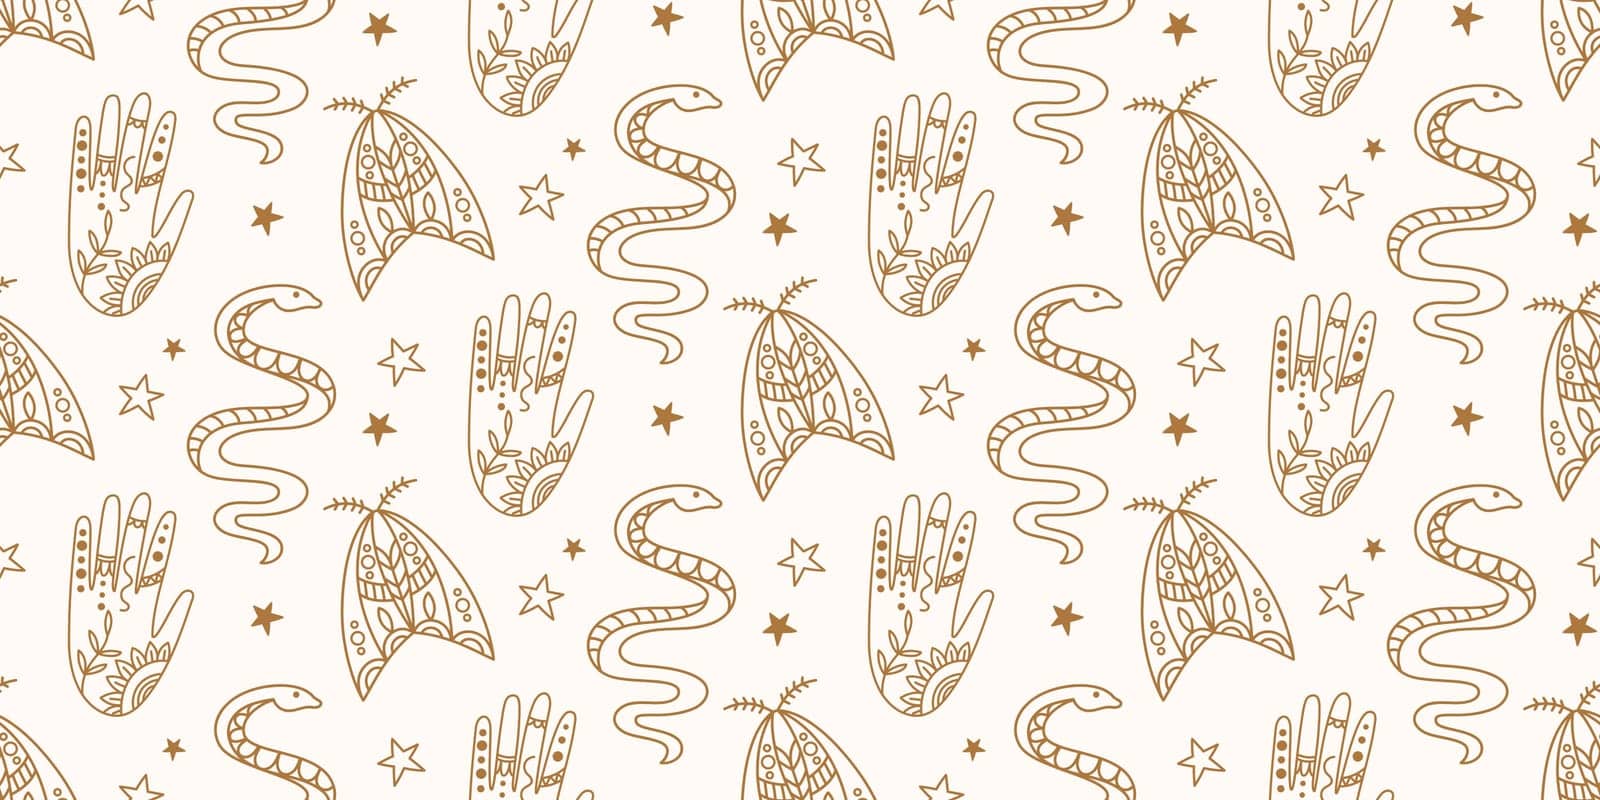 Witchcraft Seamless pattern. Mystical background hand drawn illustration. Moth, Snakes. Vector Sketch vintage style drawing. Astrology occult symbols.